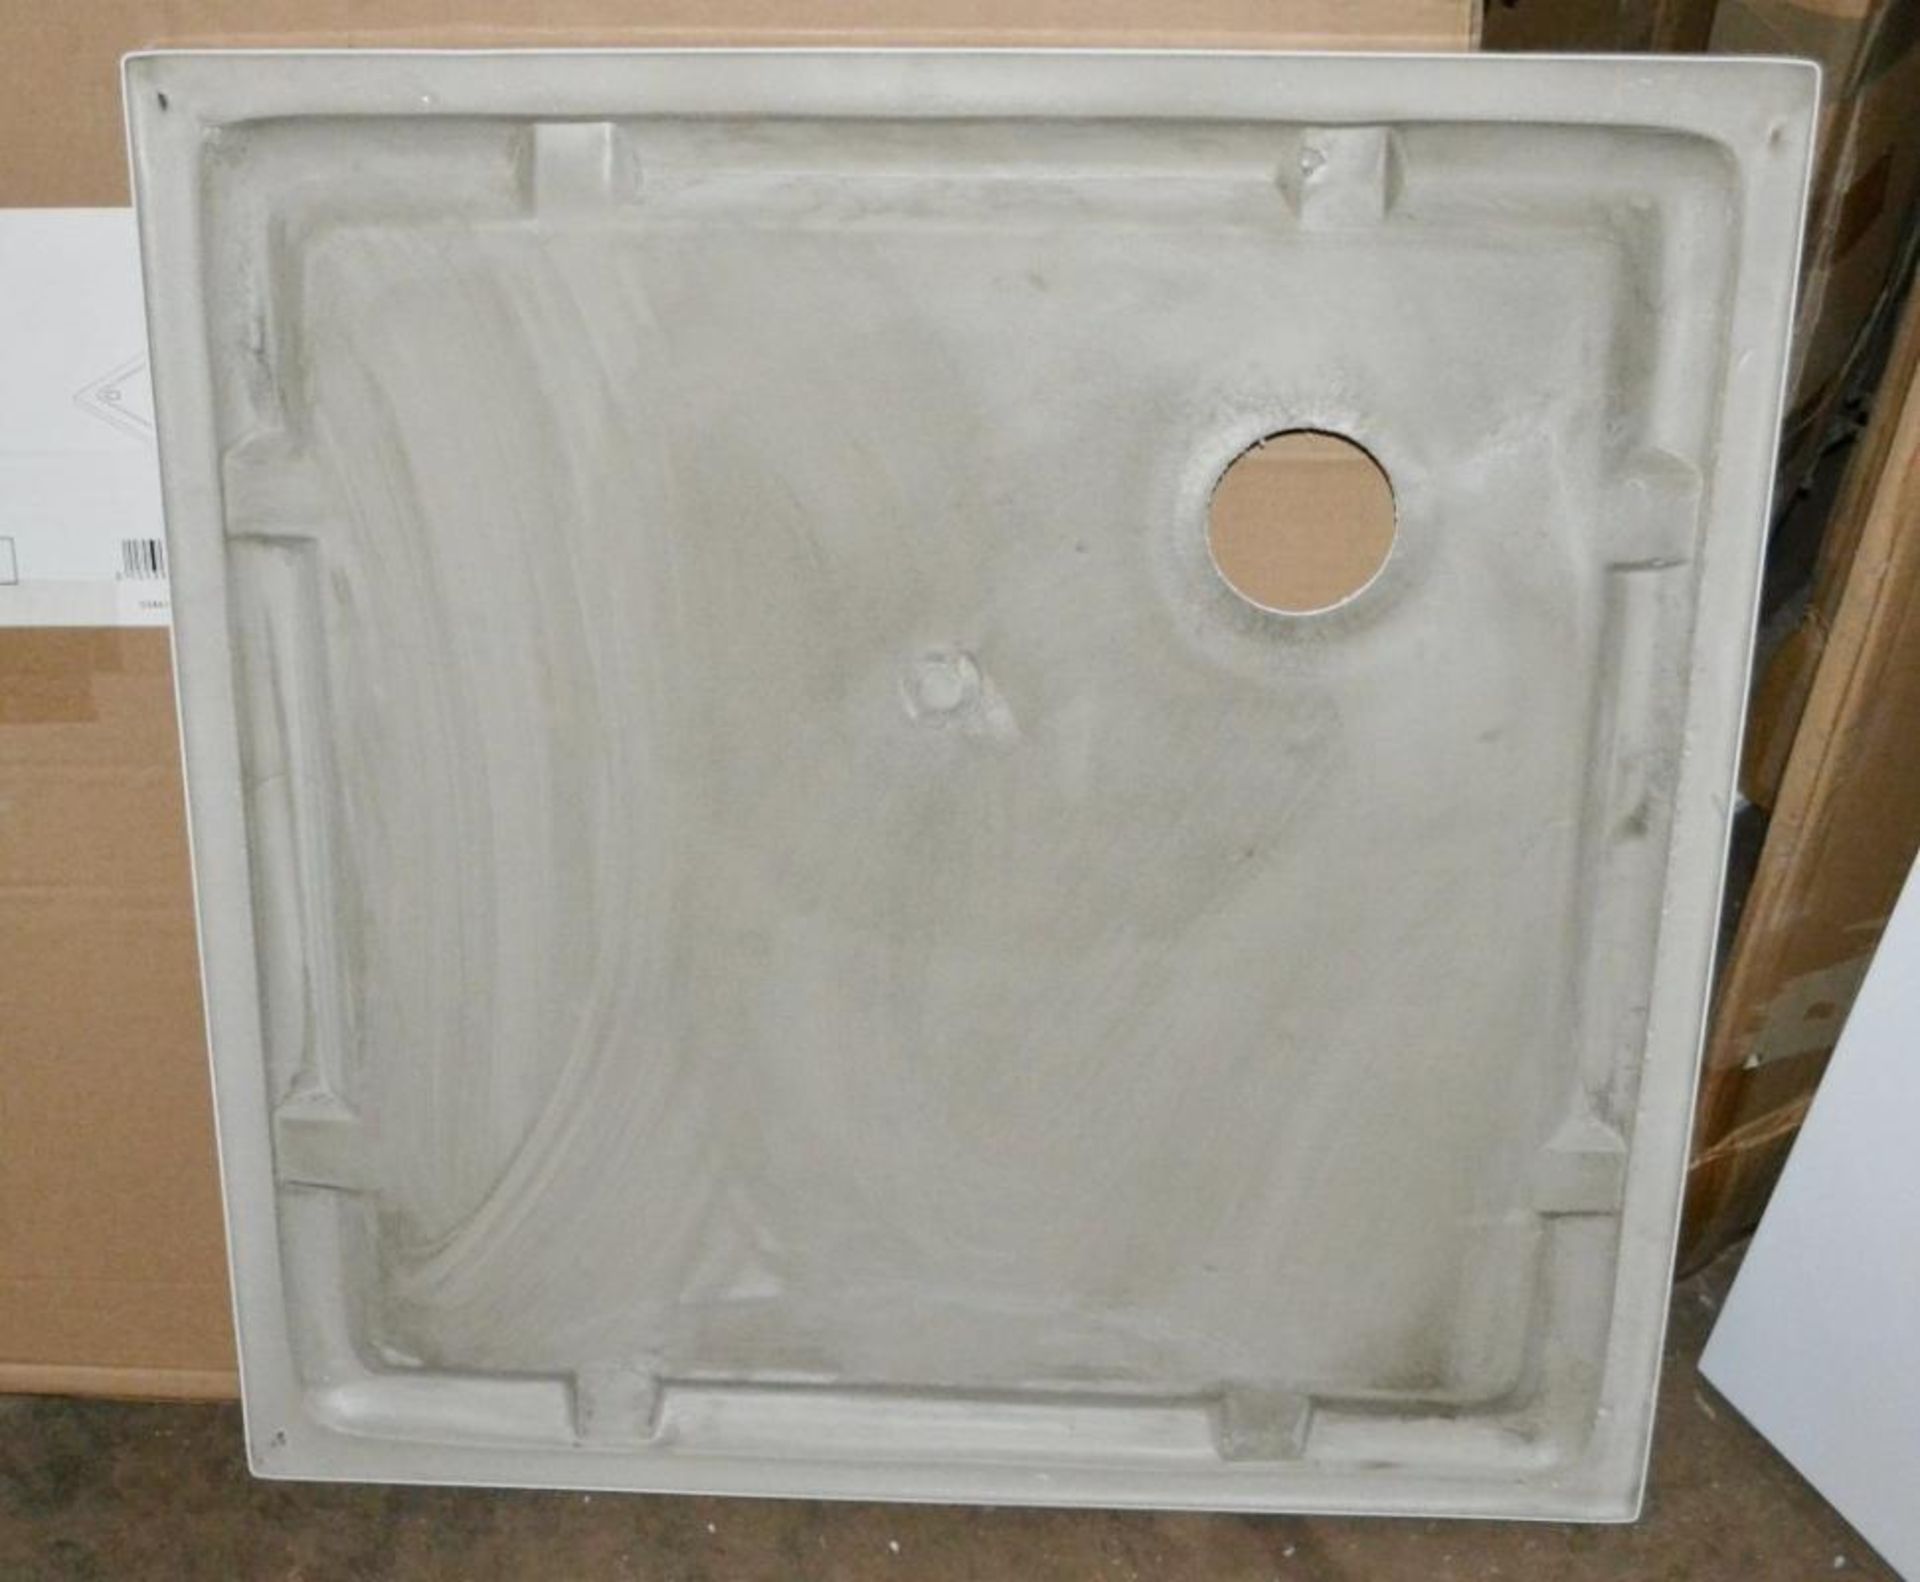 1 x 760mm Square Shower Tray - New / Unused Stock (PS76) - Ref: MT335 - CL269 - Location: Bolton BL1 - Image 2 of 4